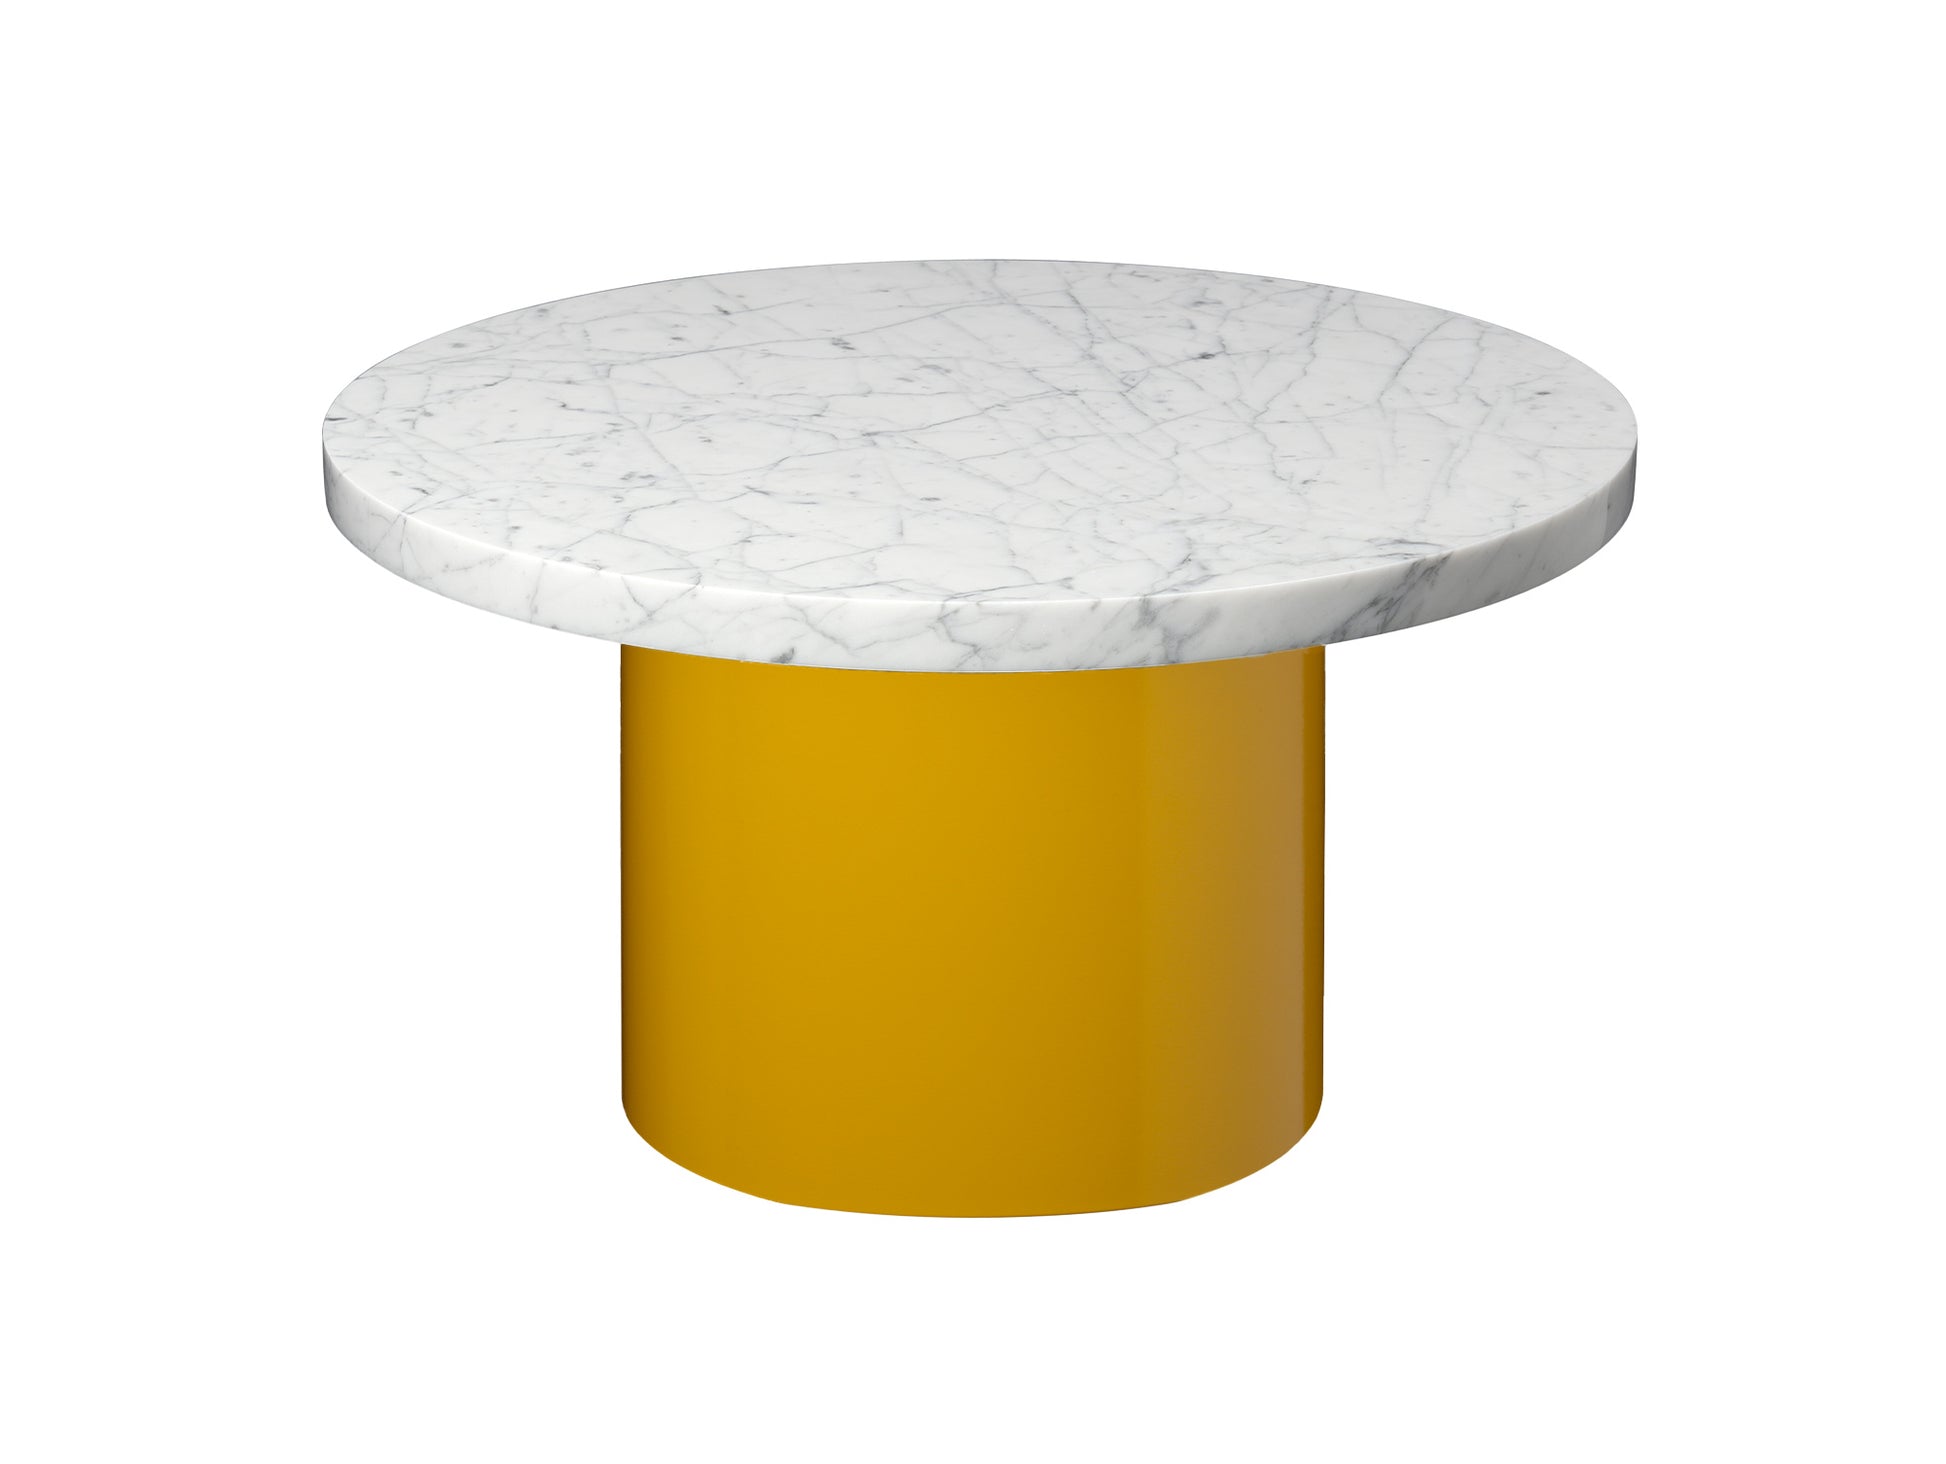 CT09 Enoki Side Table by e15 - (D55 H30 cm) Bianco Carrara Marble Tabletop  / Honey Yellow Steel Base